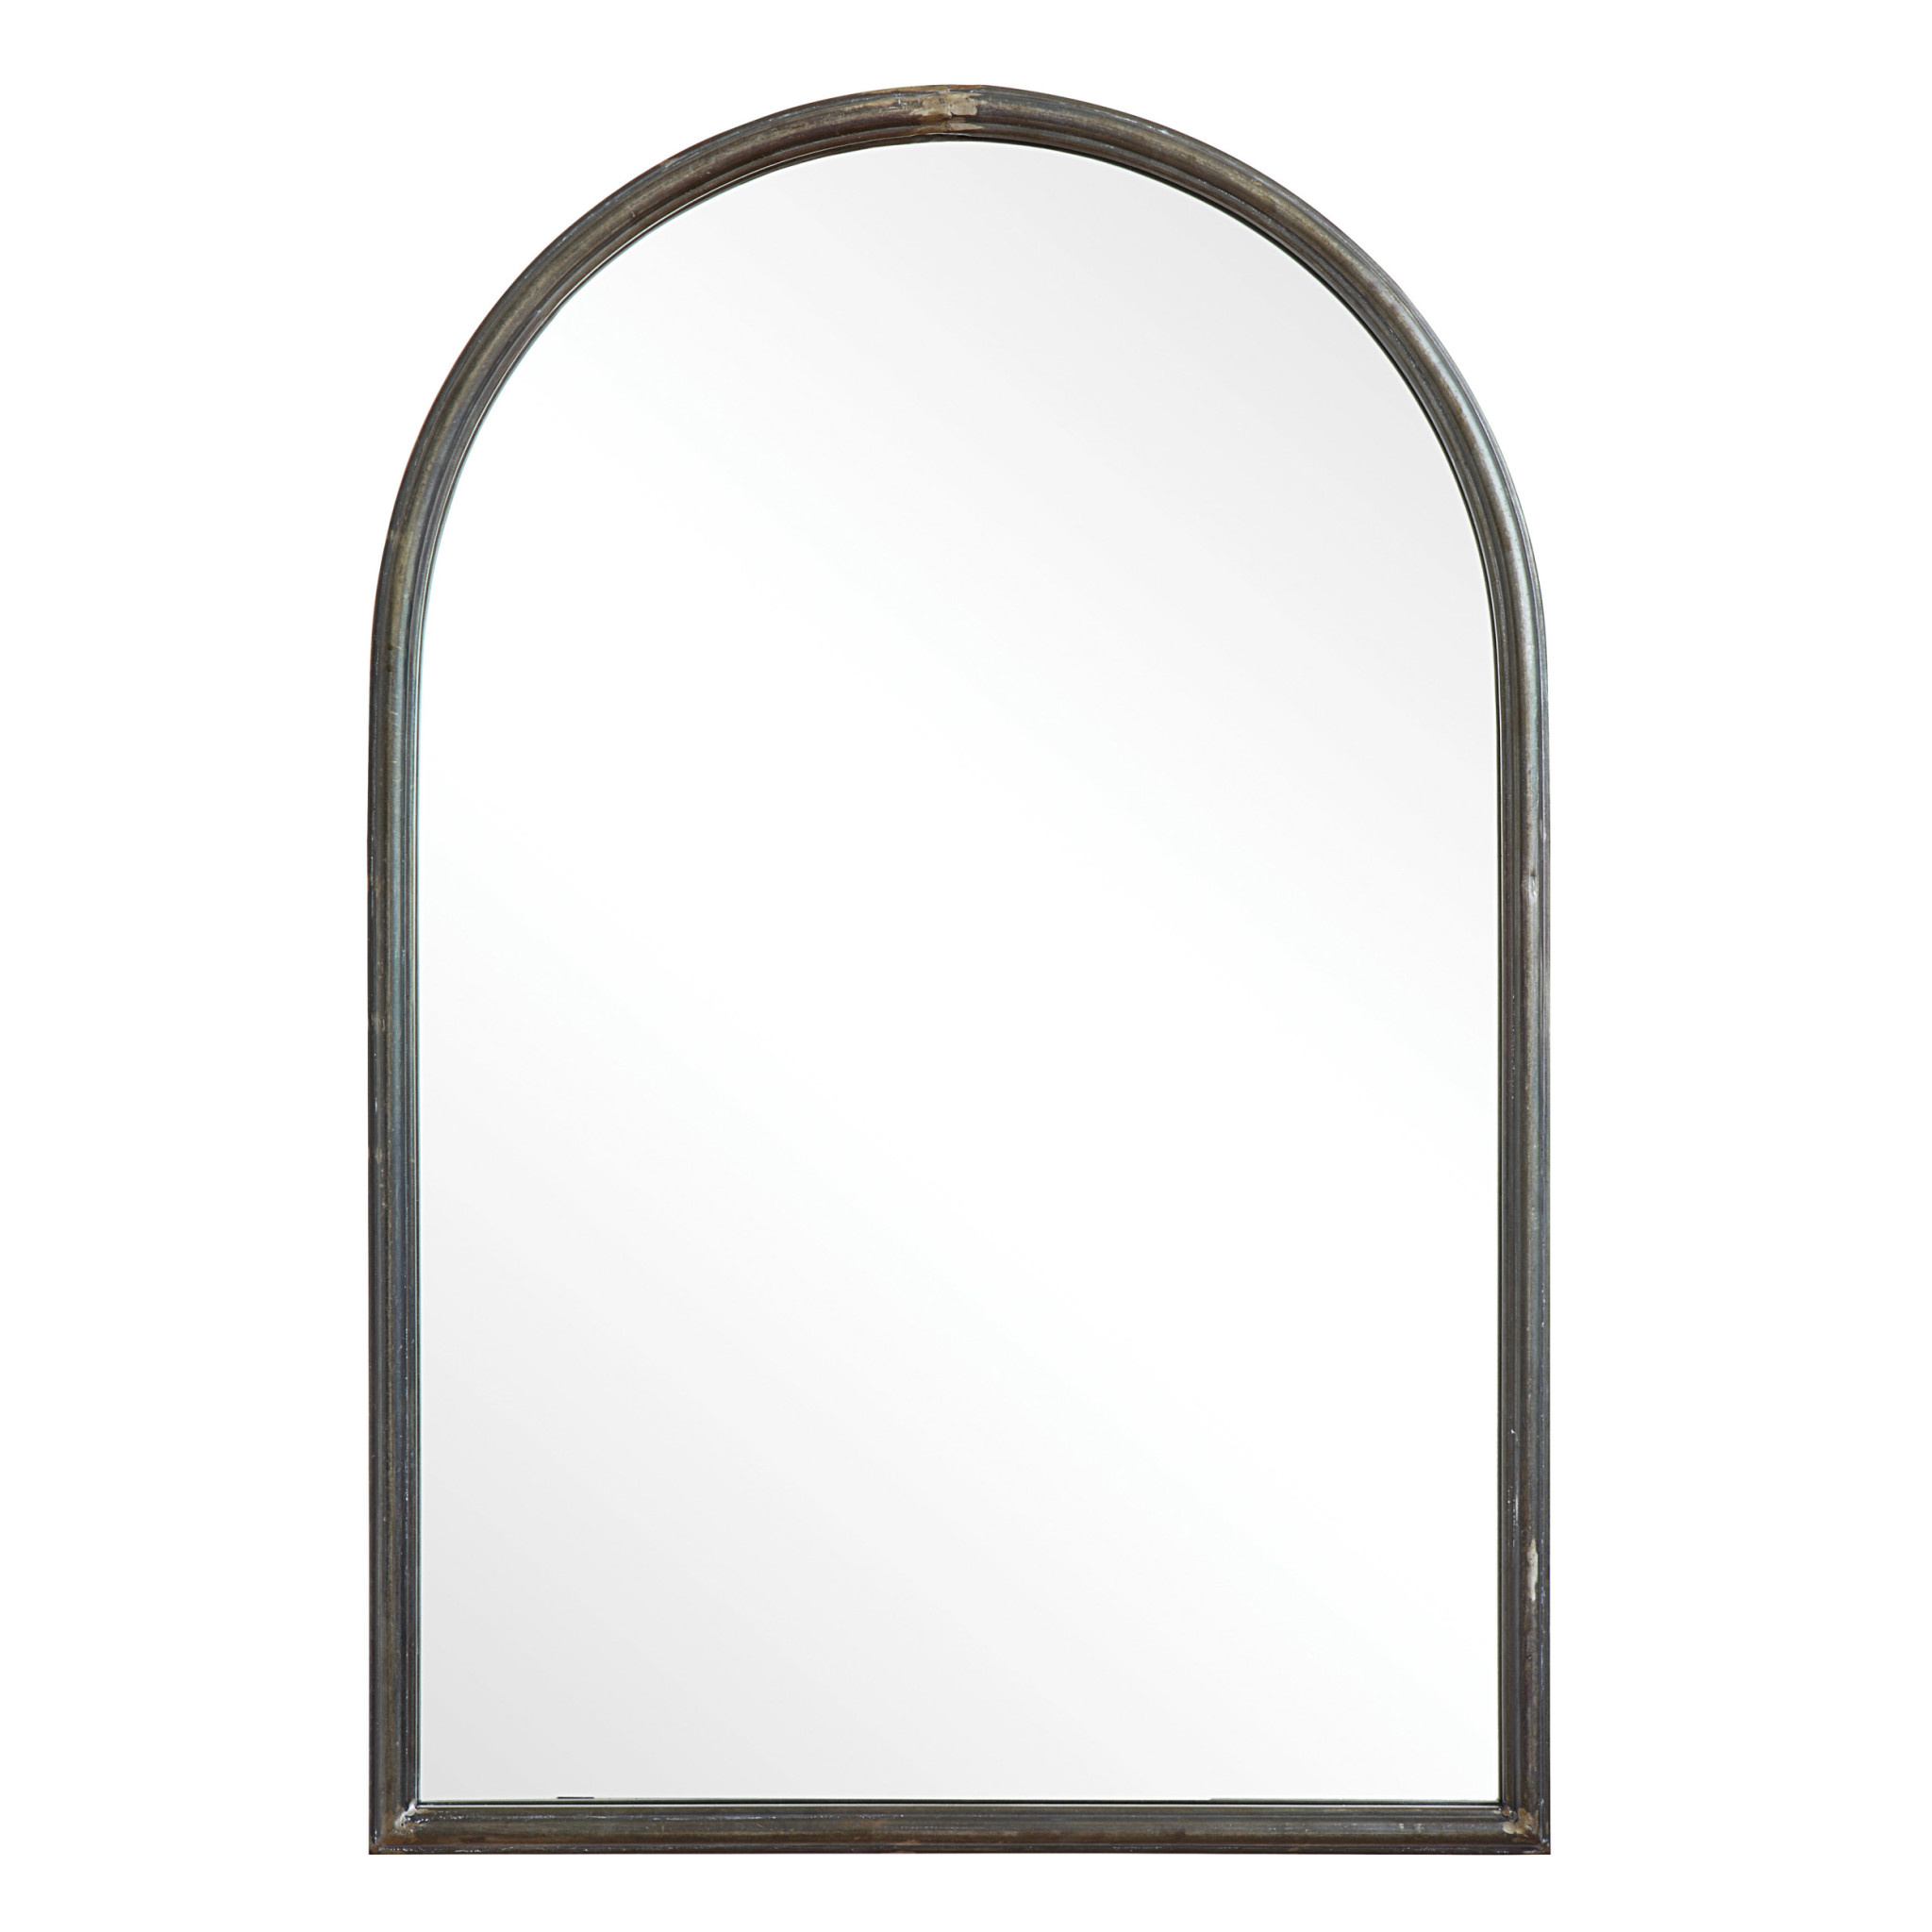 Arched Metal Framed Wall Mirror, Black 24"x36", Available for local pick up